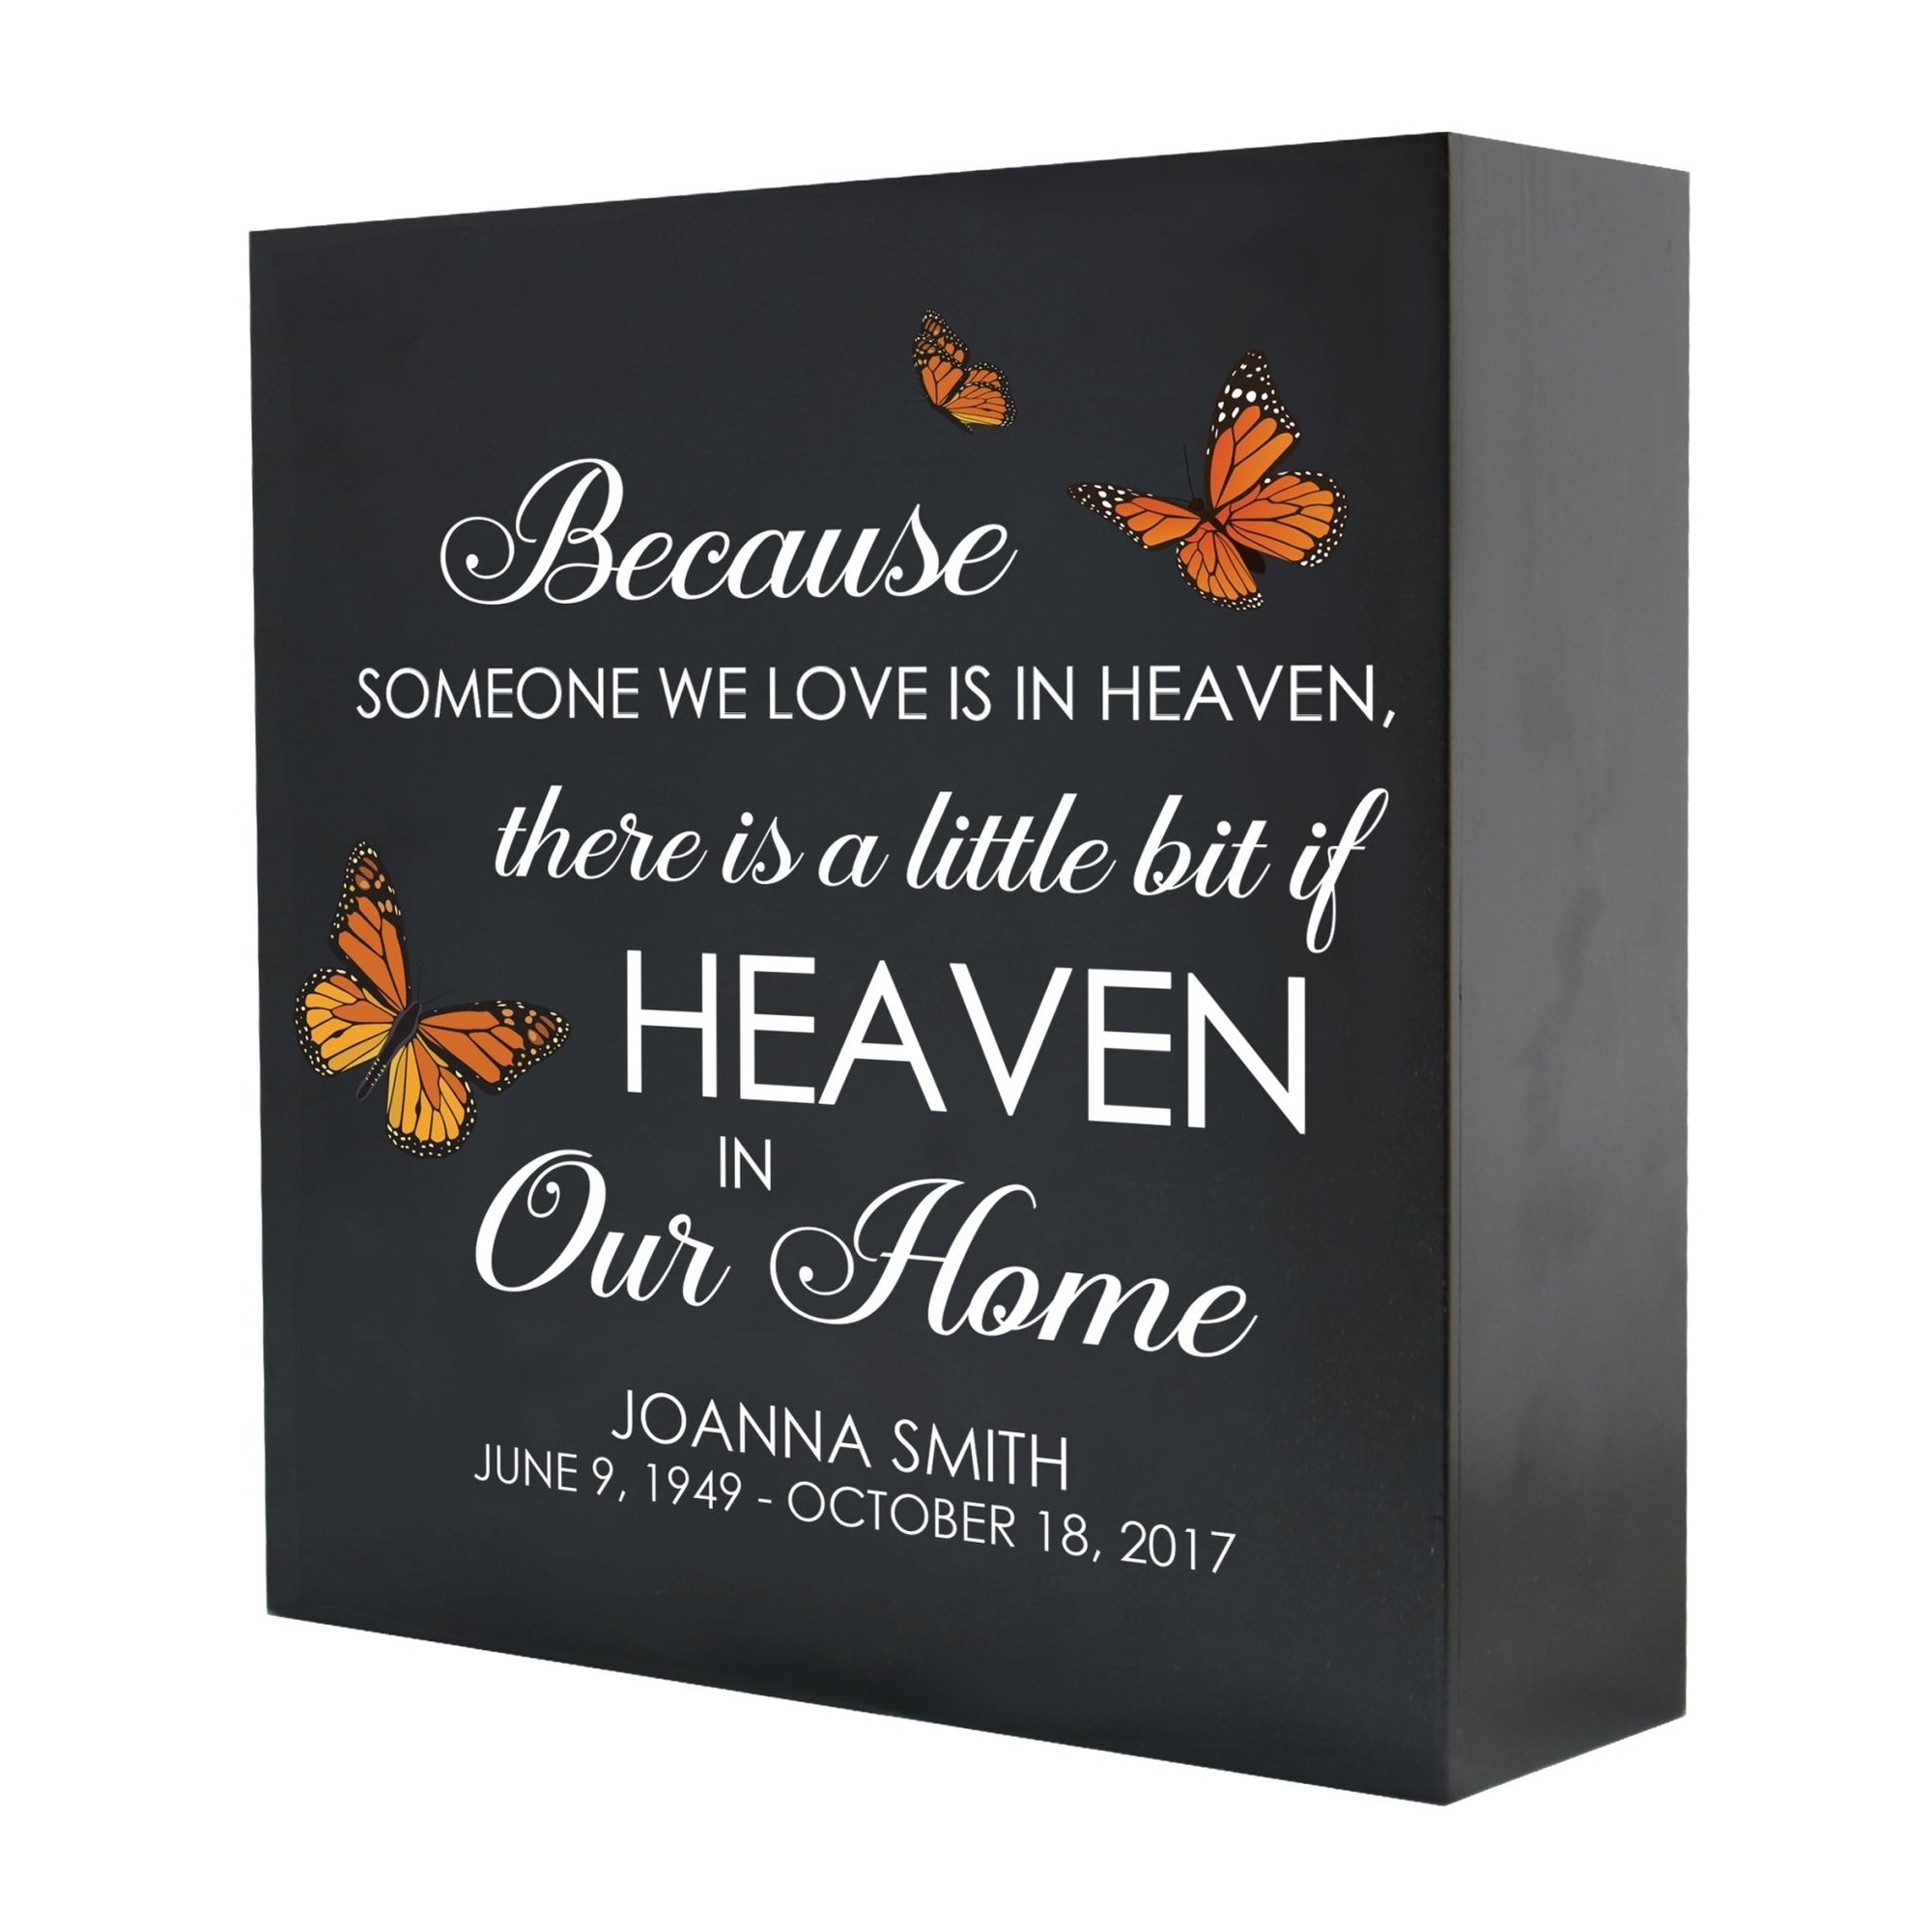 Personalized Modern Inspirational Memorial Wooden Shadow Box and Urn 10x10 holds 189 cu in of Human Ashes - Because Someone We Love (Black) - LifeSong Milestones